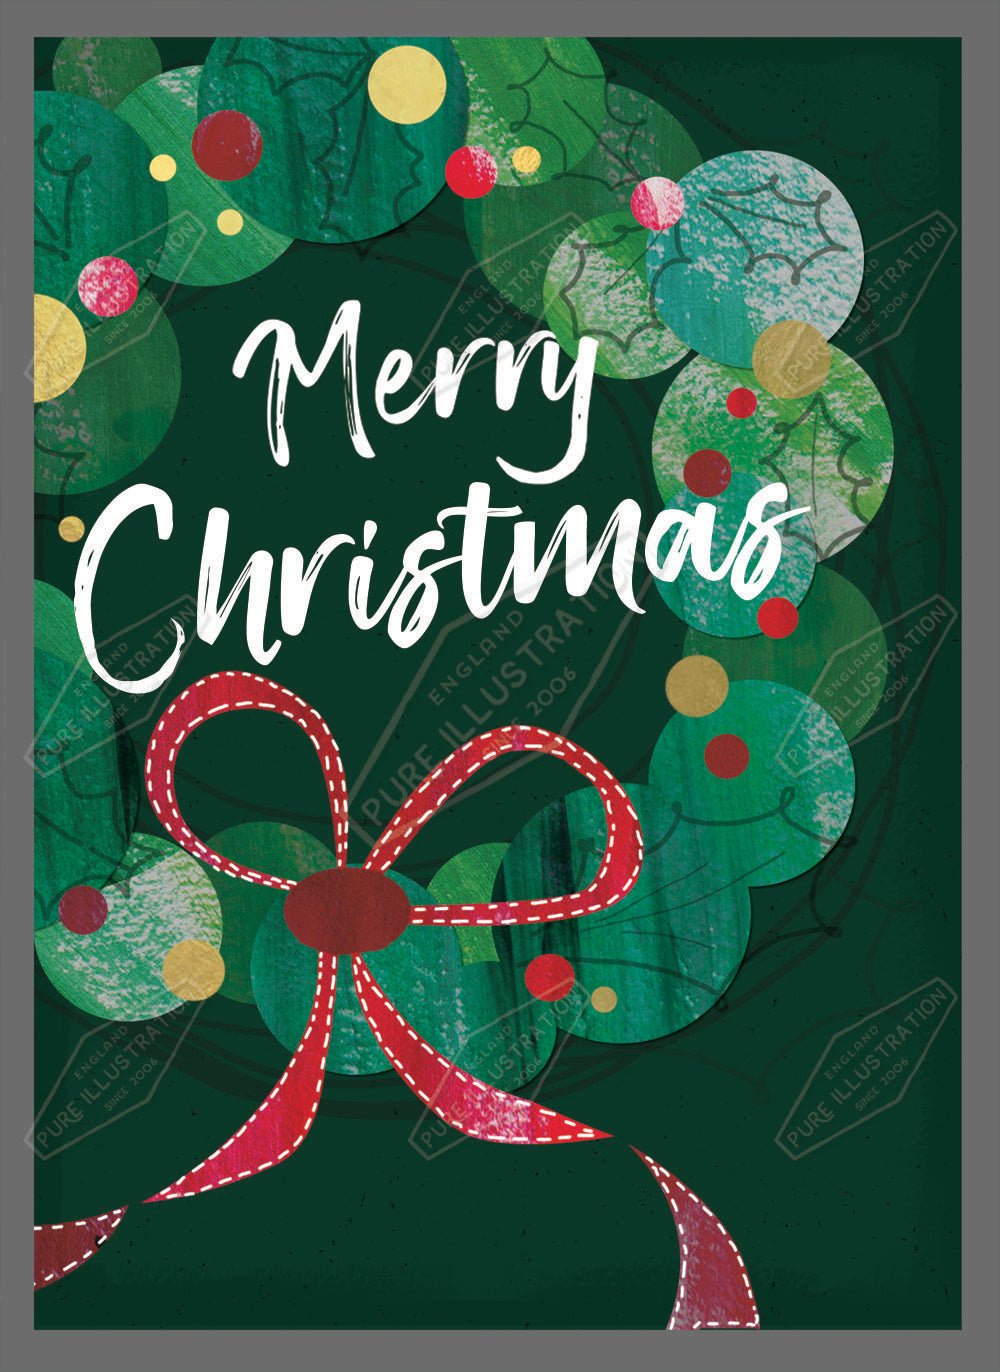 00030181SLA- Sarah Lake is represented by Pure Art Licensing Agency - Christmas Greeting Card Design